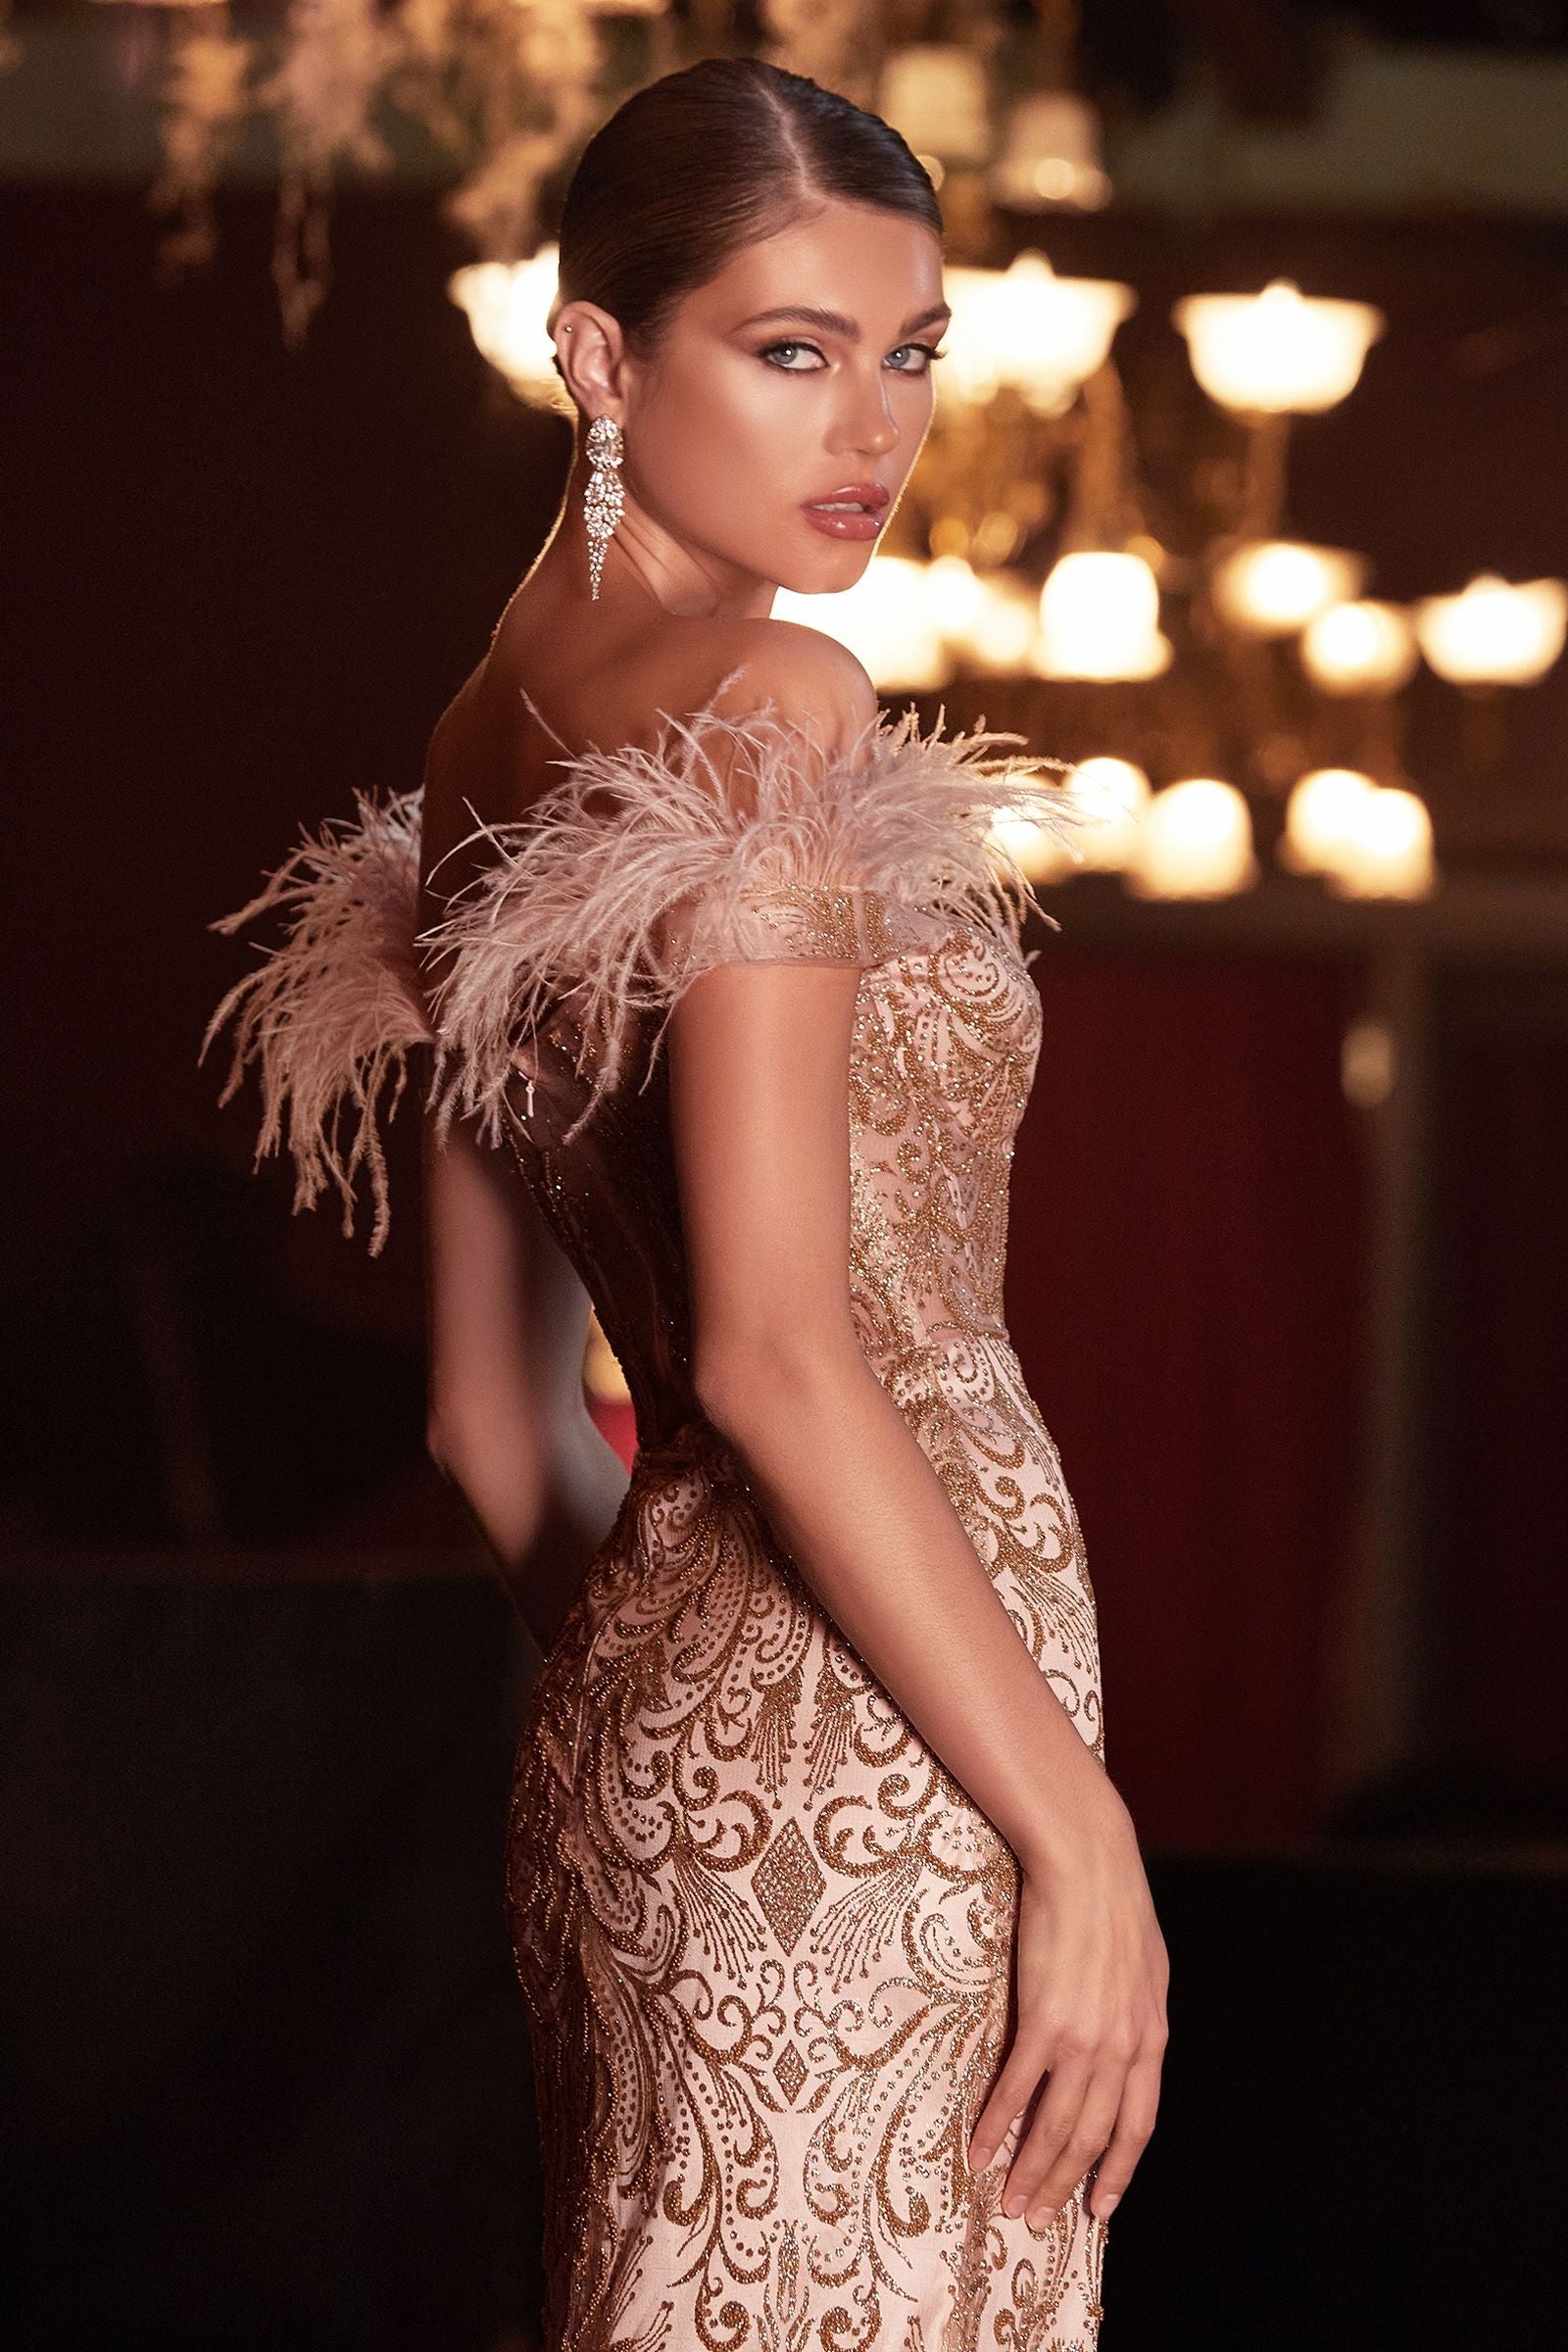 A back view of a mermaid gown with a sheer covered back and feathered off-the-shoulder detail.